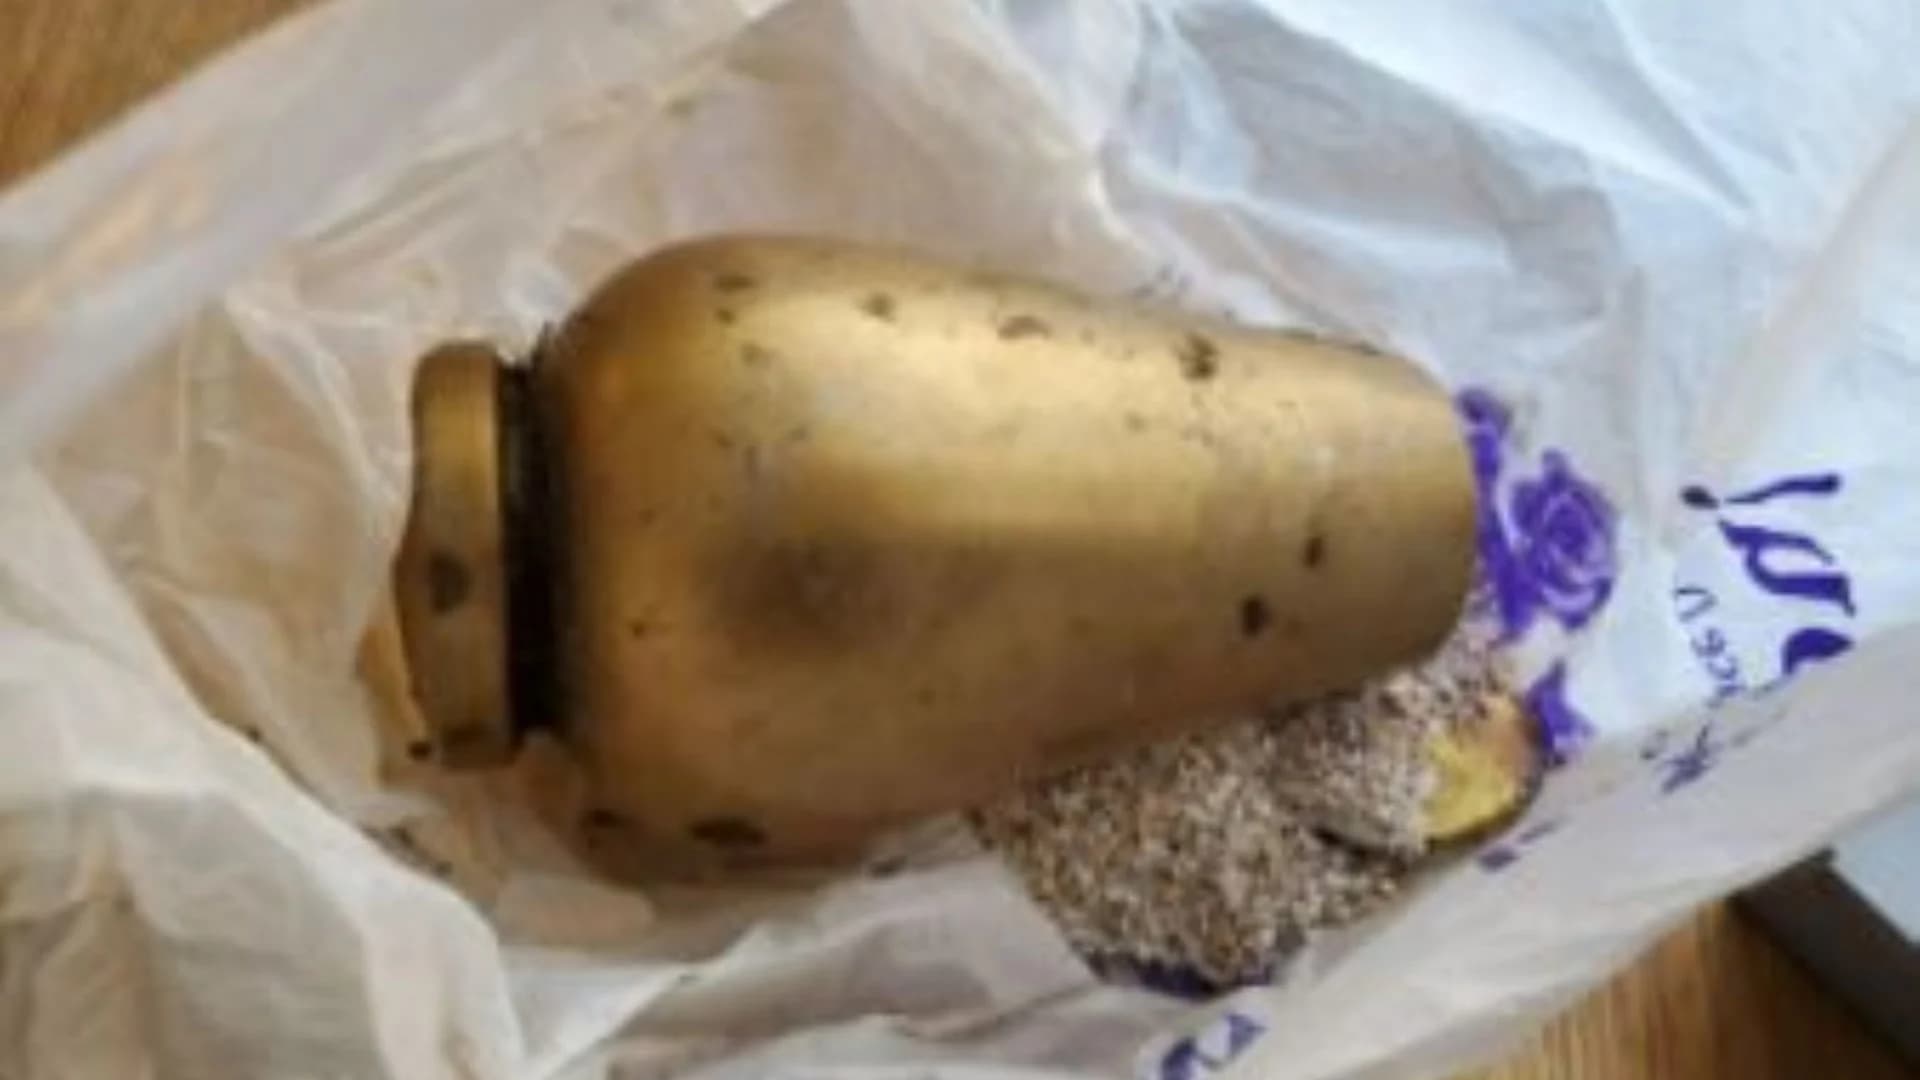 Police seek owners of burial urn found by hikers in state park